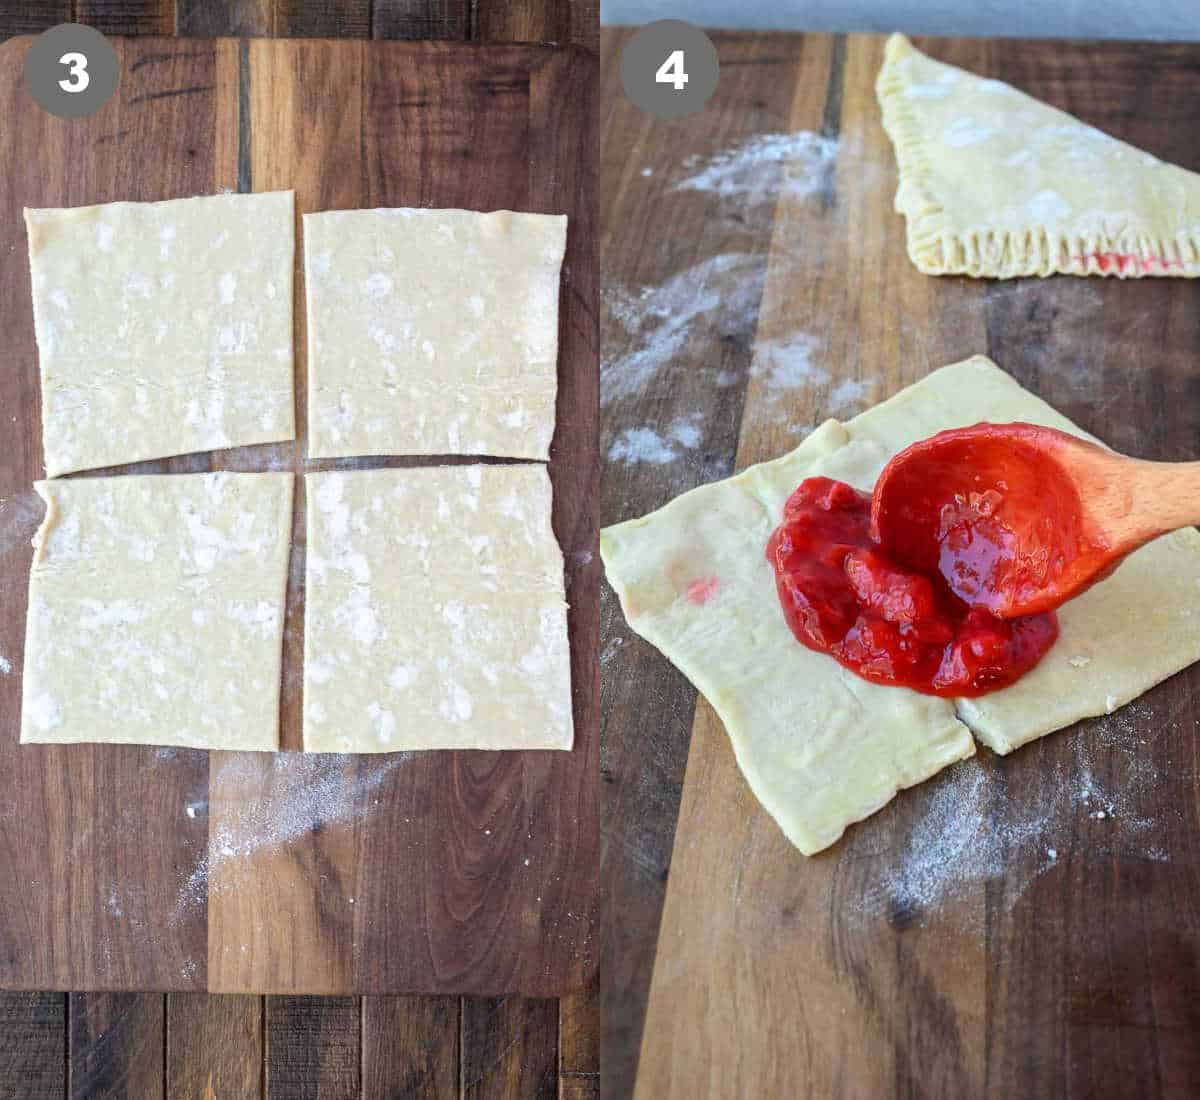 Puff pastry cut into four even squares and strawberry filling added in them.